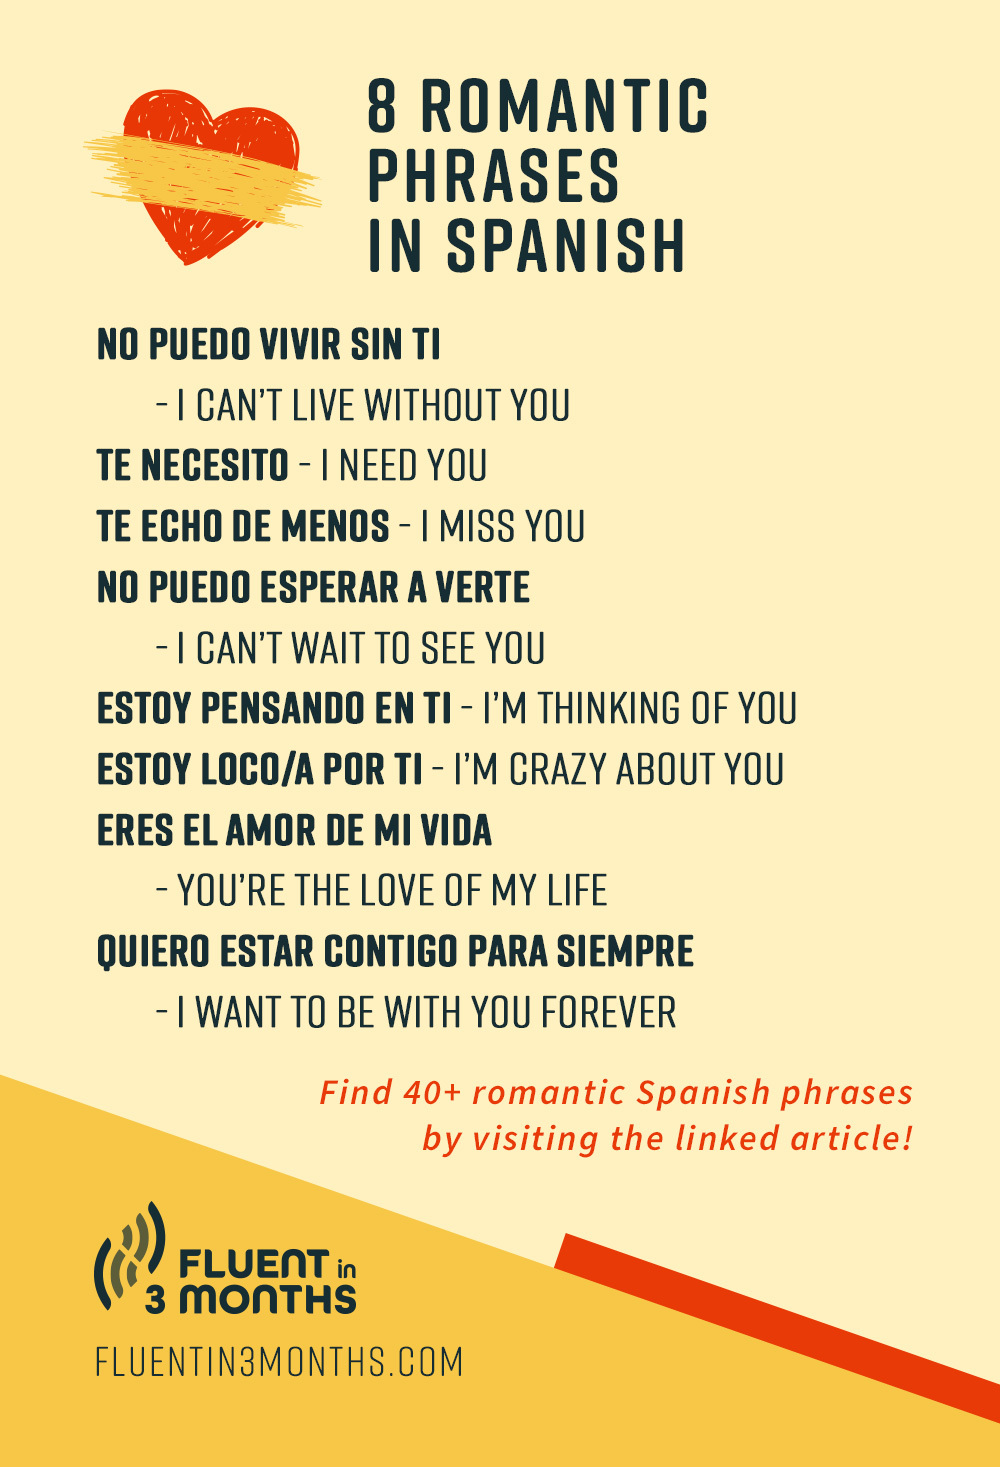 Svag kom over Udførelse How to Say "I Love You" in Spanish (and 50+ Other Romantic Phrases)